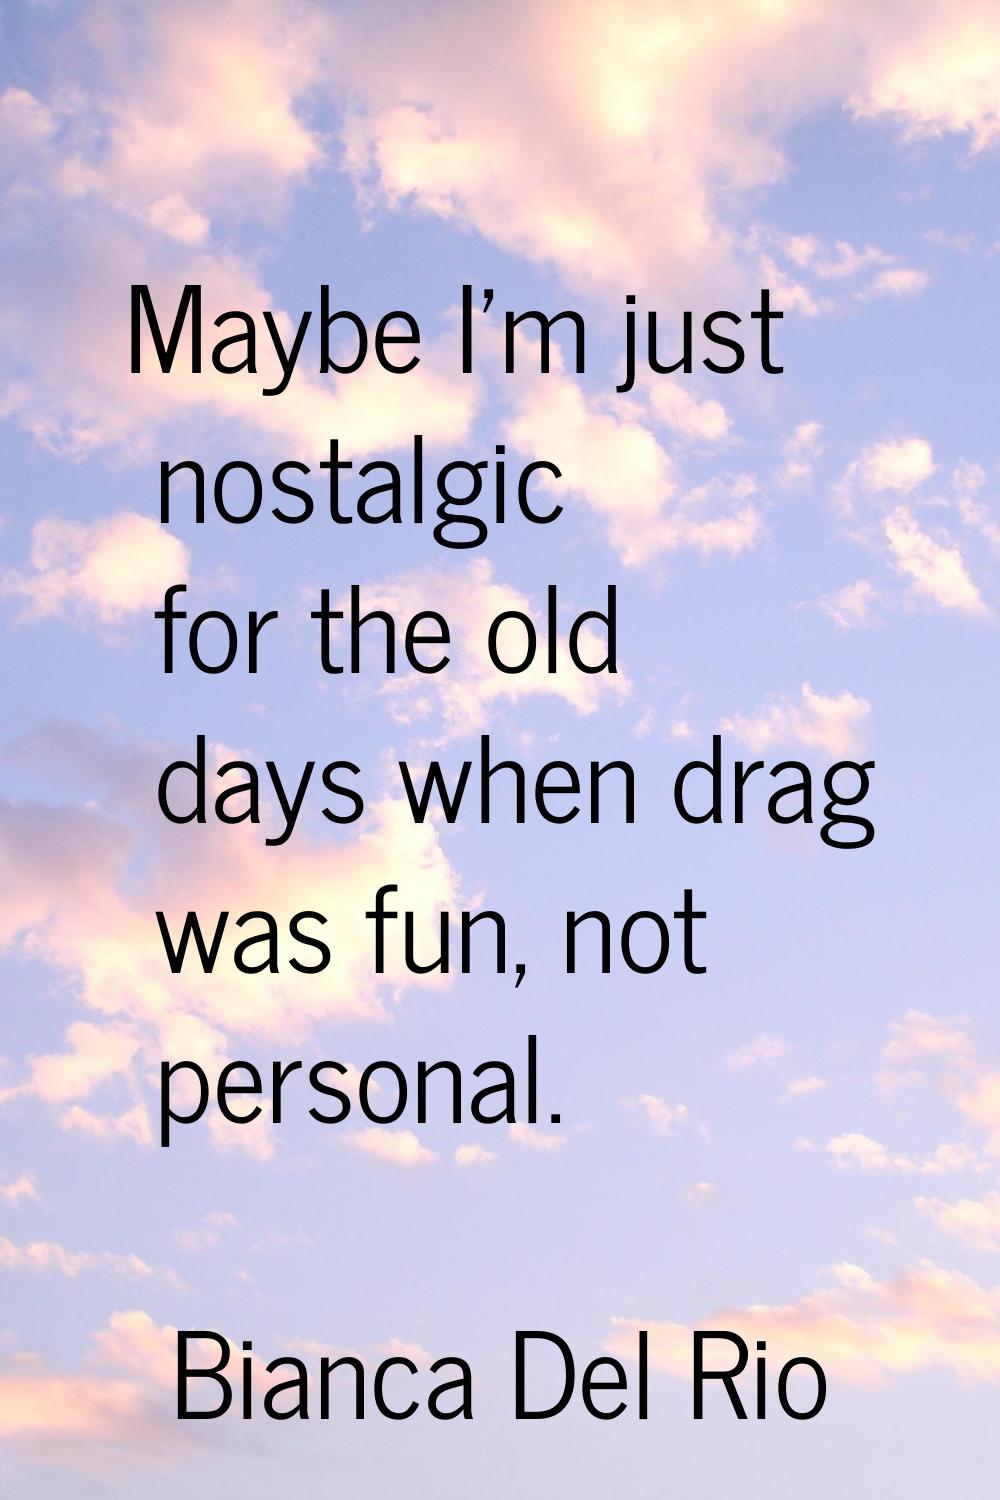 Maybe I'm just nostalgic for the old days when drag was fun, not personal.